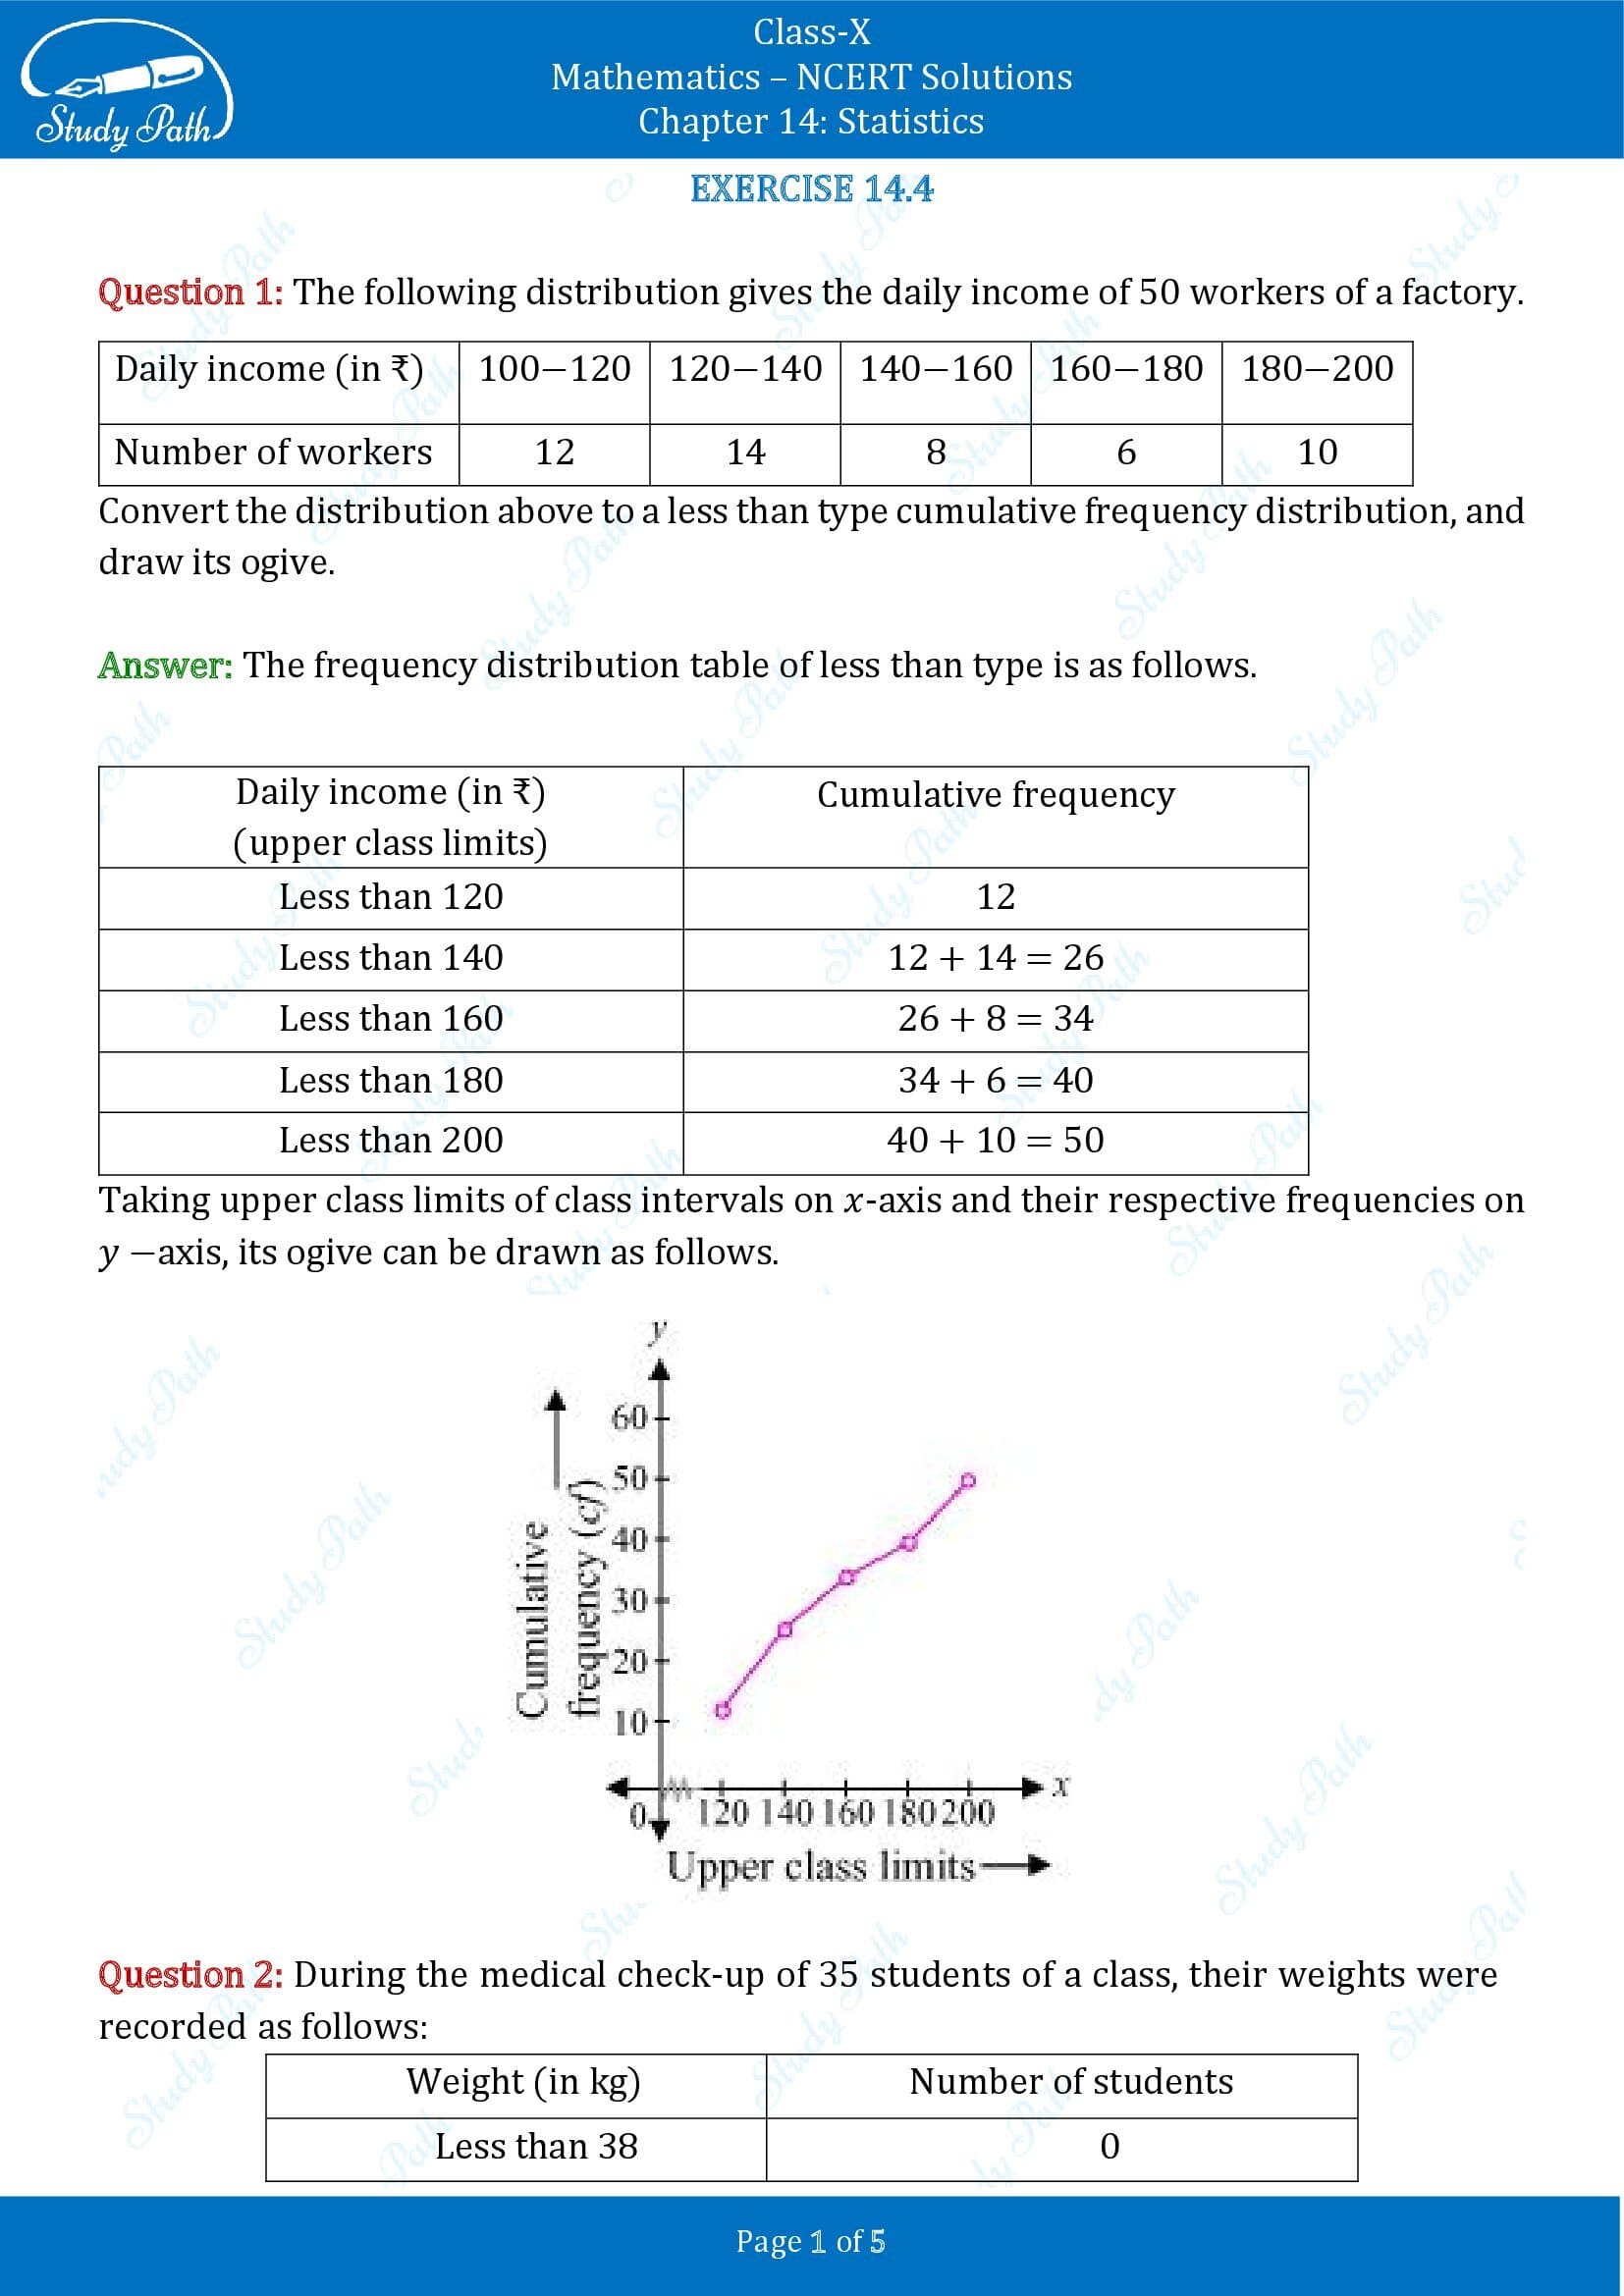 NCERT Solutions for Class 10 Maths Chapter 14 Statistics Exercise 14.4 00001